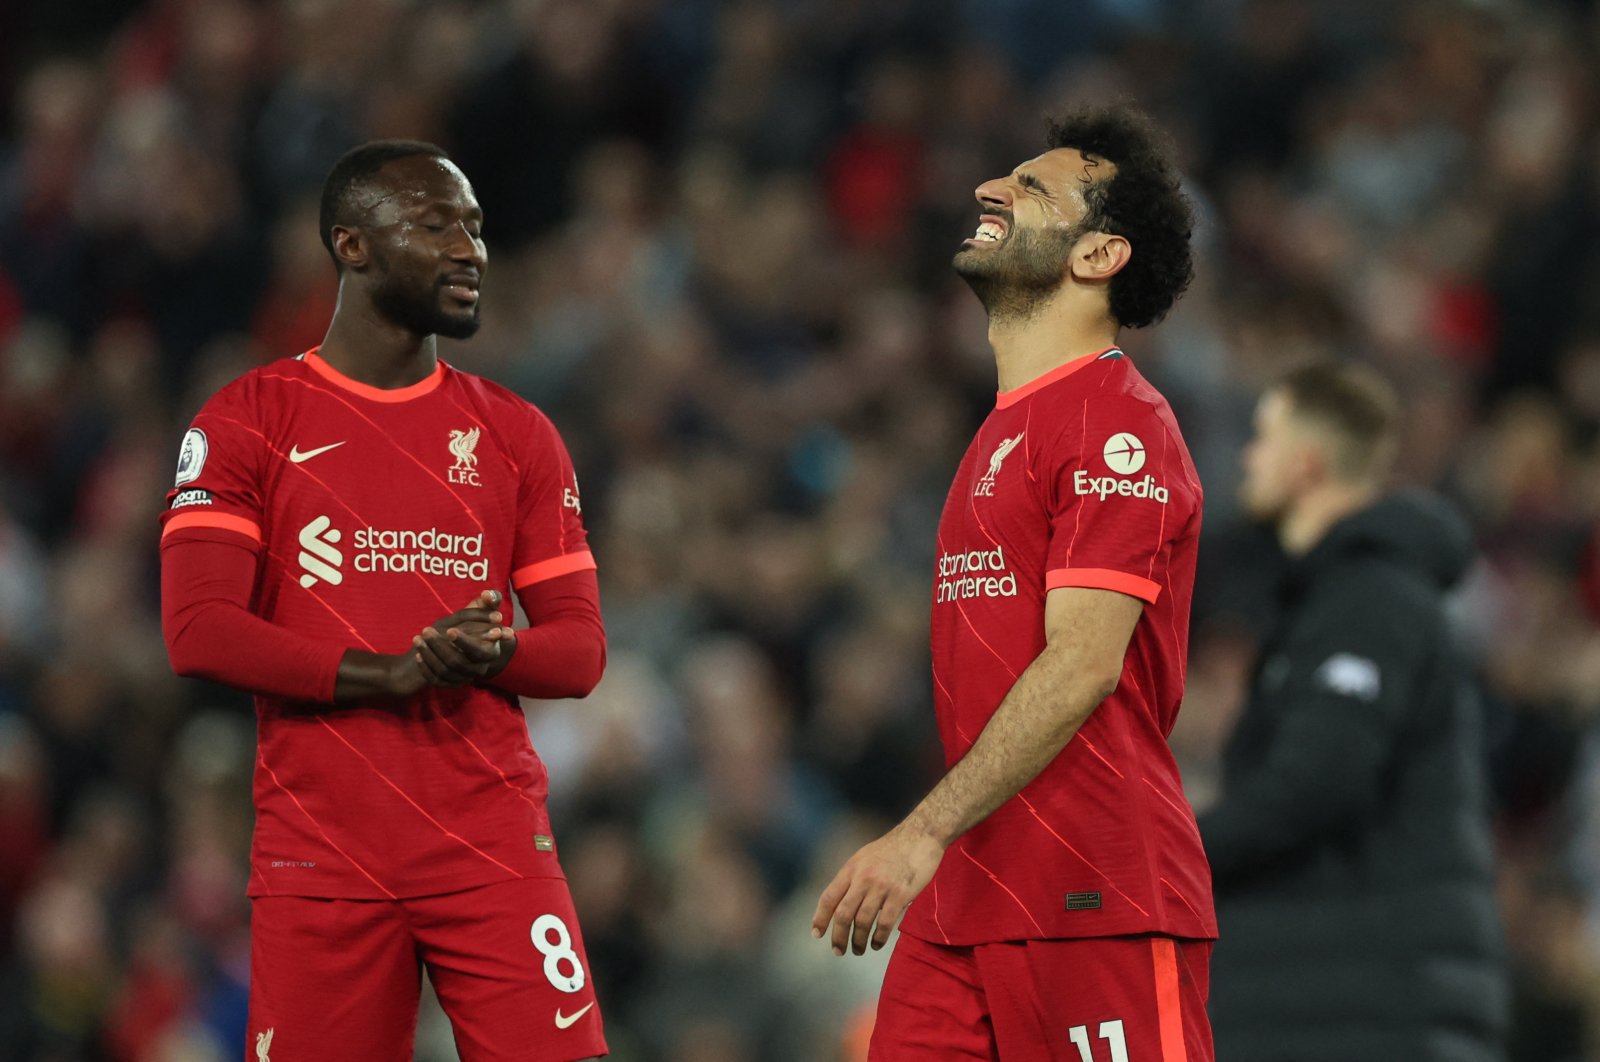 Liverpool&#039;s Mohamed Salah (R) and Naby Keita reacts after a Premier League match against Tottenham Hotspur, Liverpool, England, May 7, 2022. (Reuters Photo)